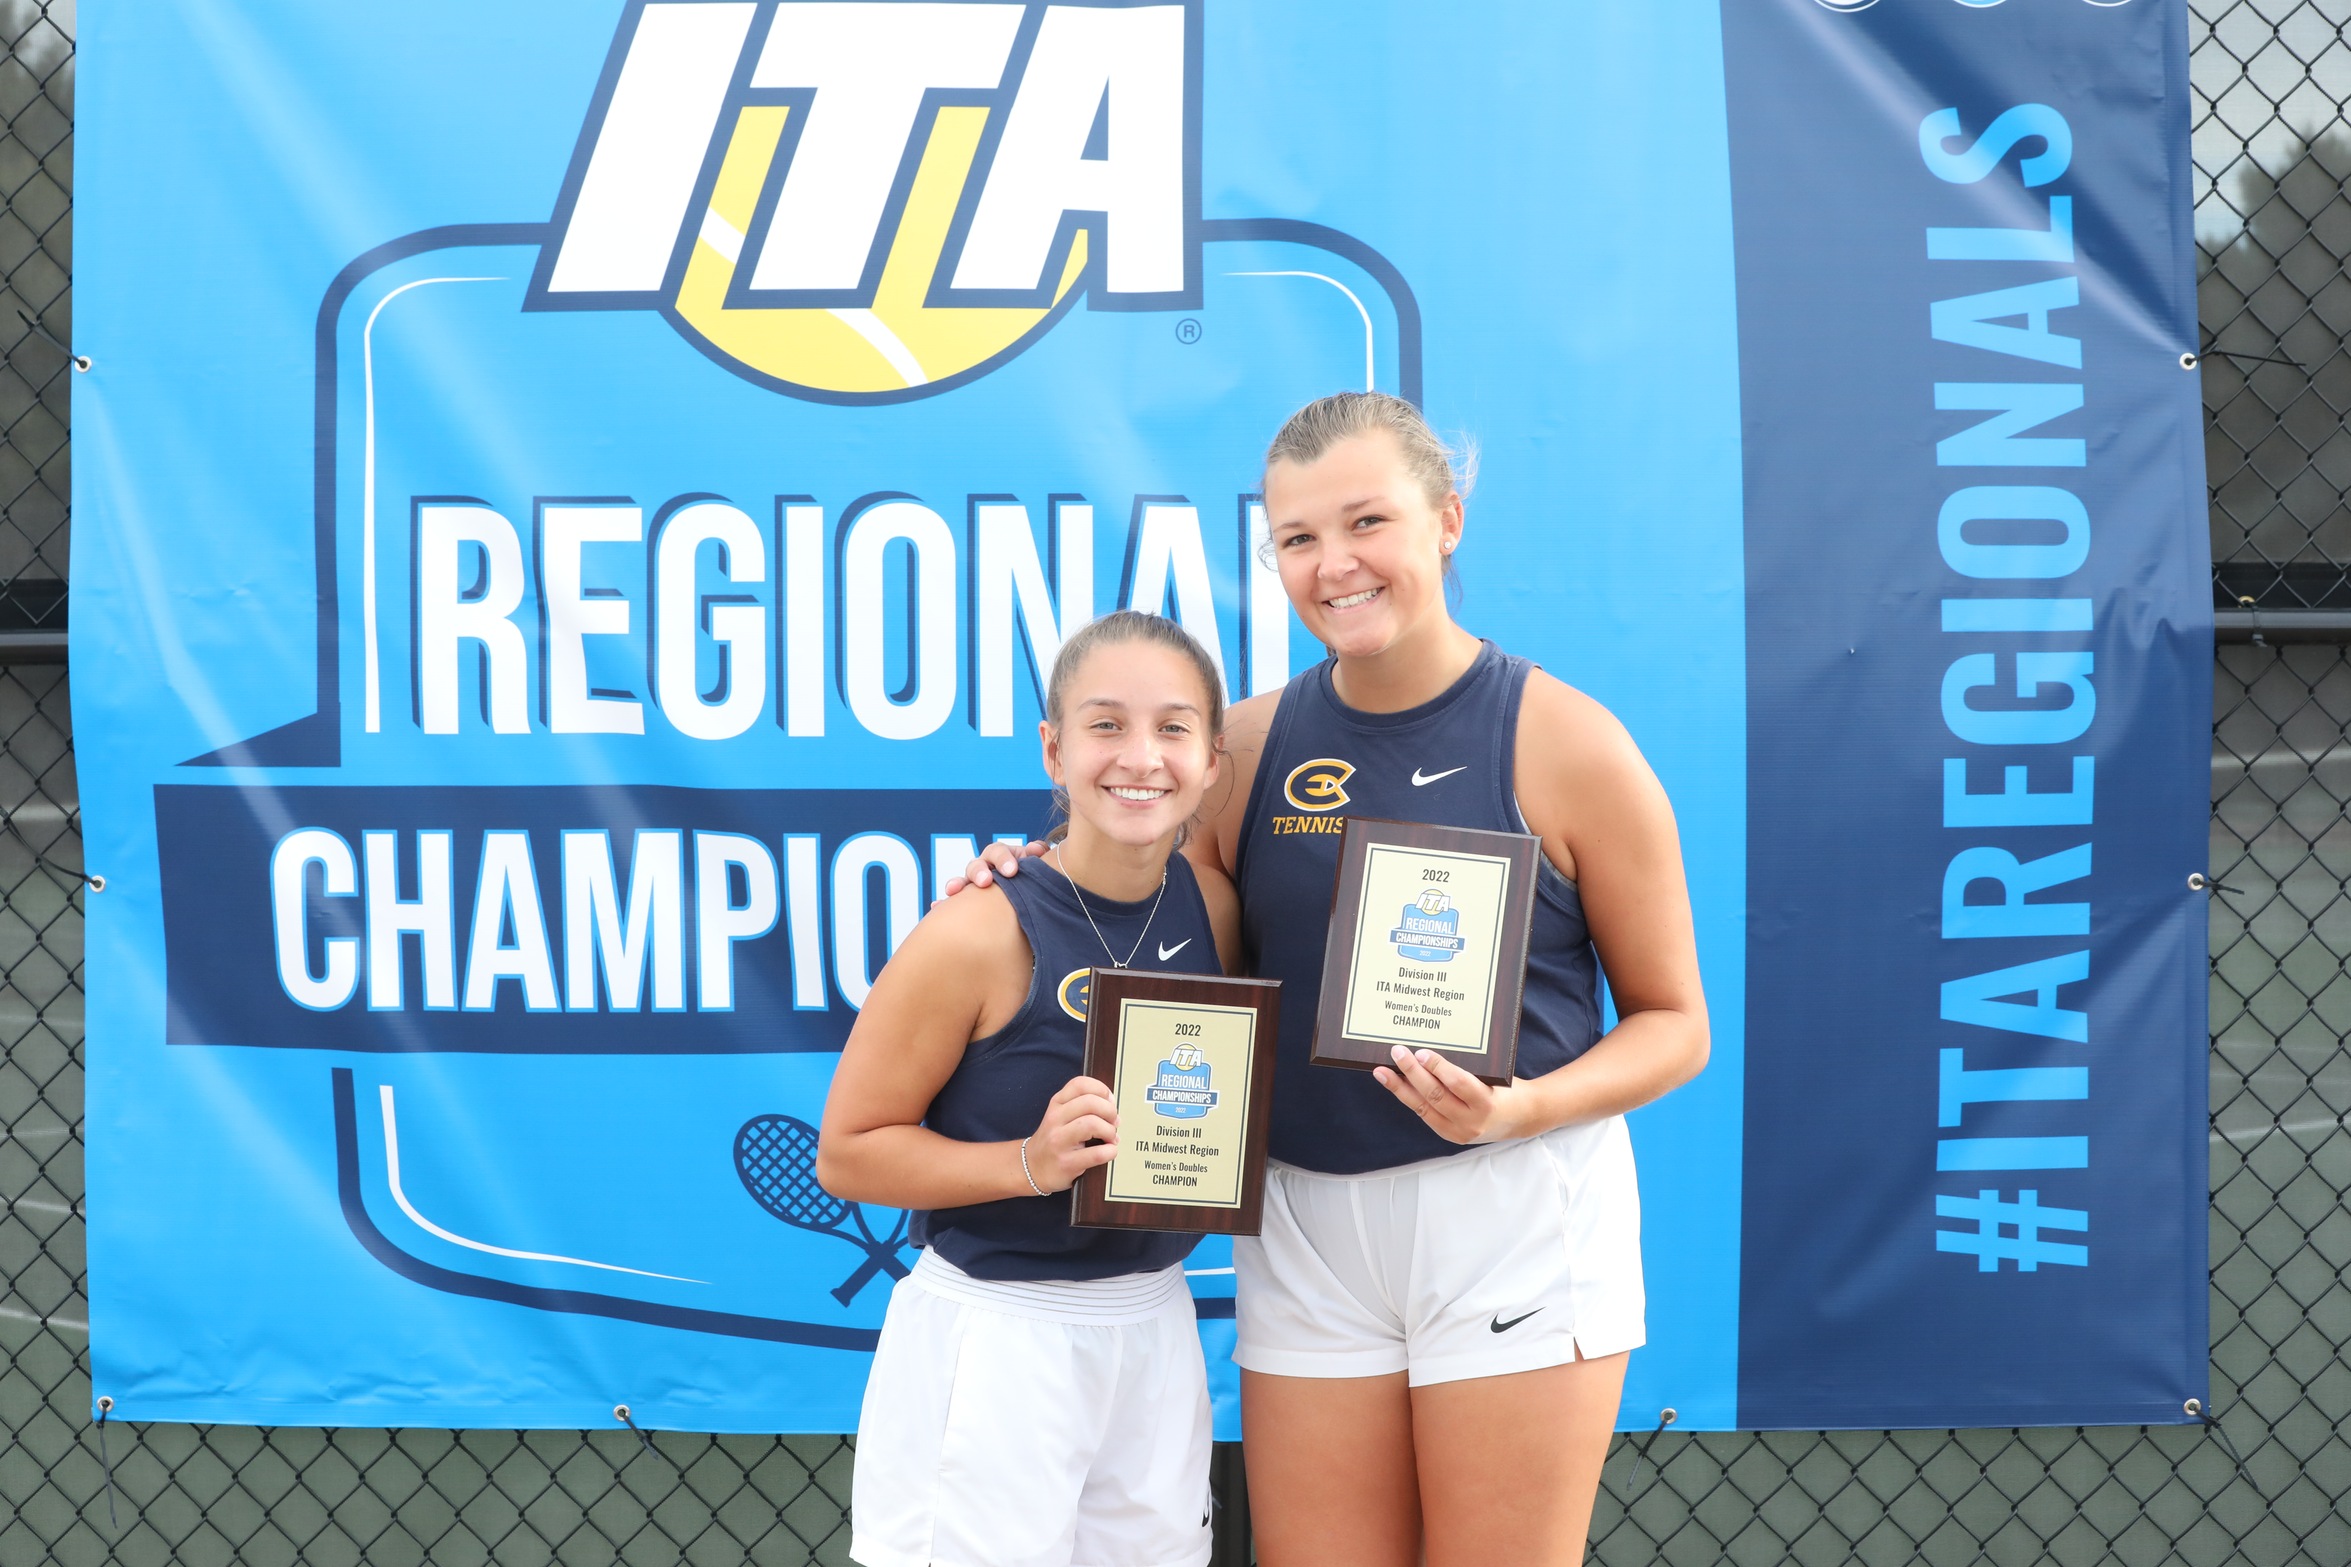 Fuchs and Palen Place Second at ITA Regionals